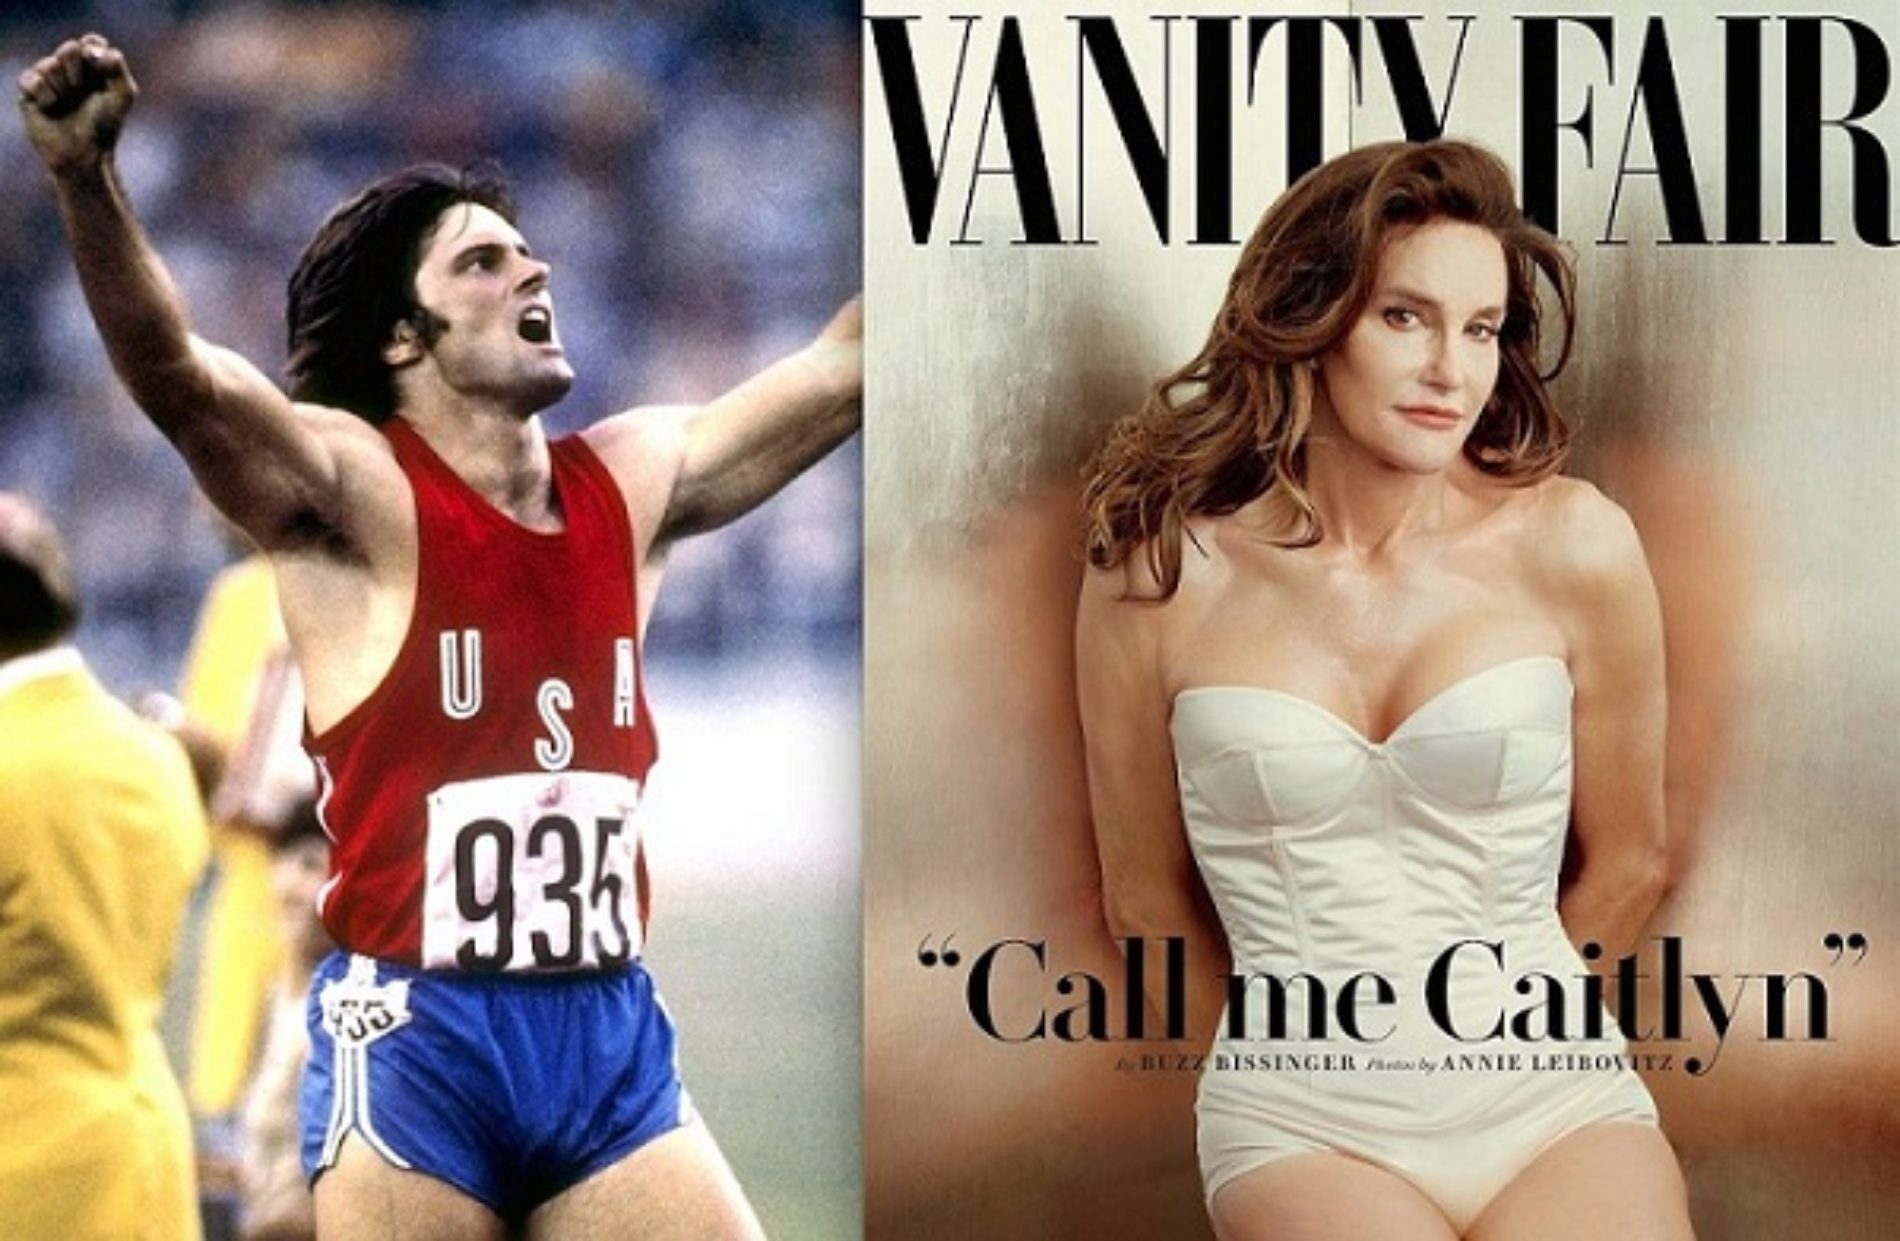 Petition calls for Caitlyn Jenner’s Olympic medals to be taken away